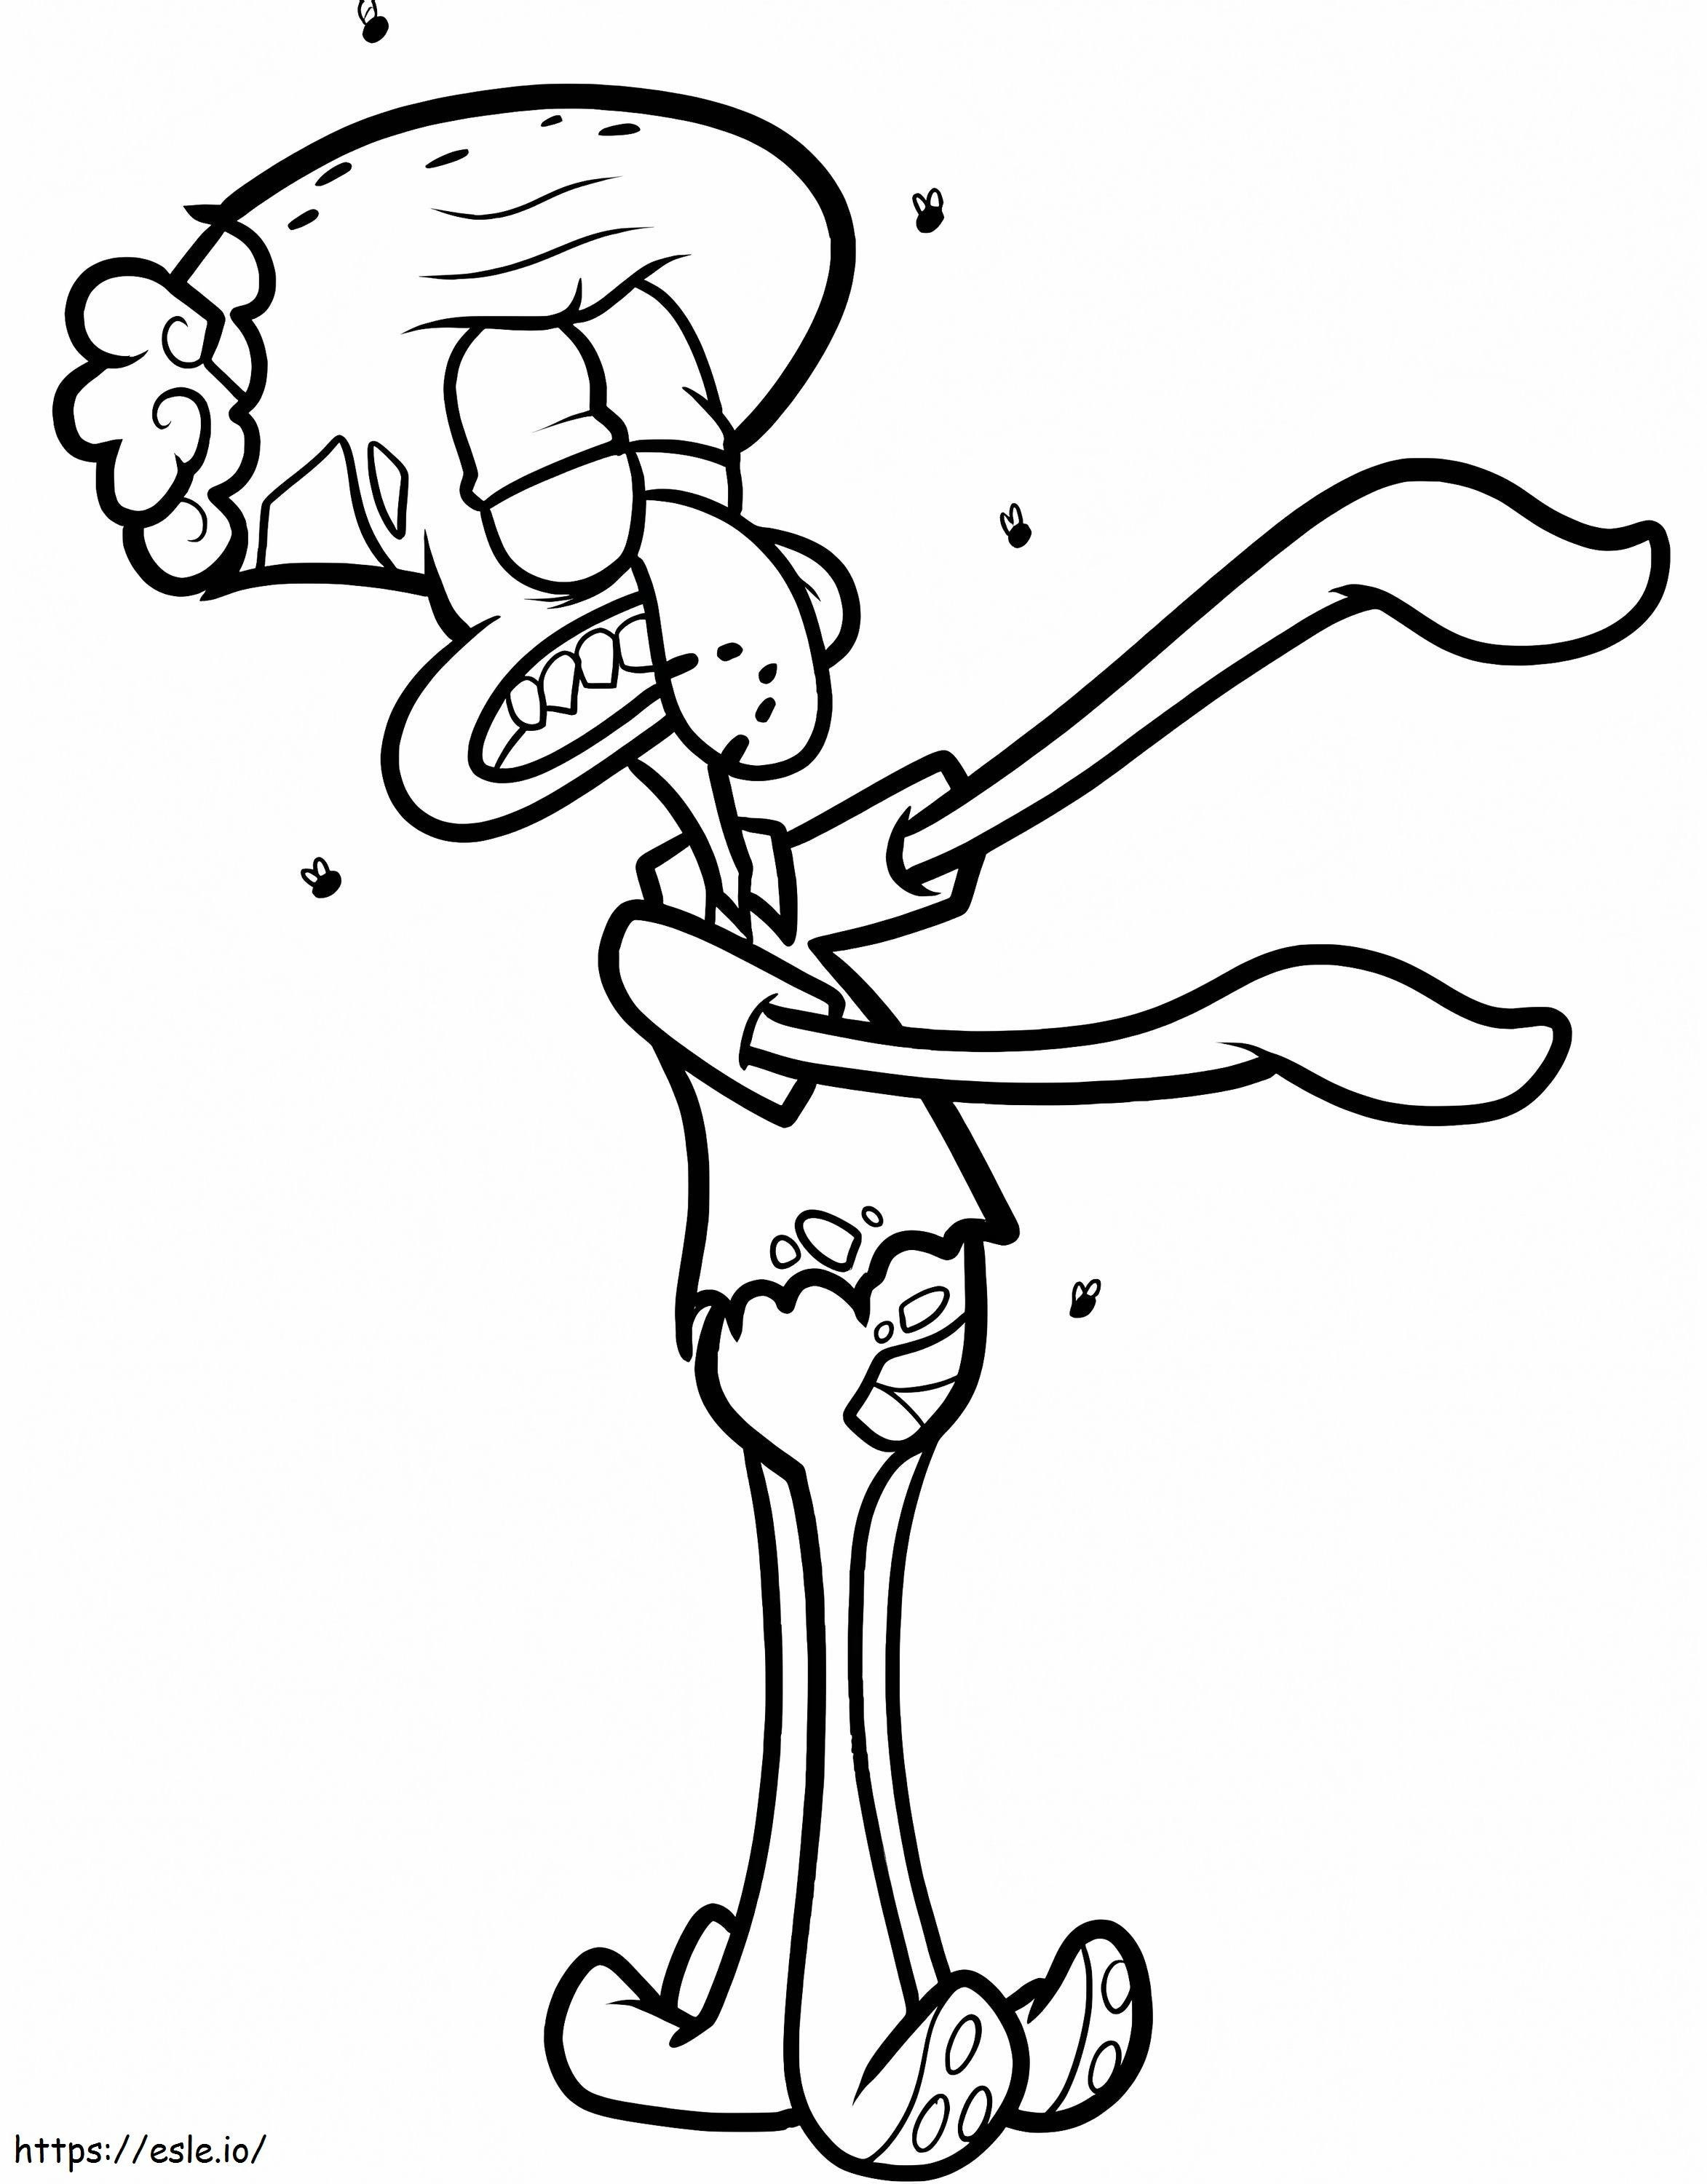 Zombie Squidward Tentacles coloring page